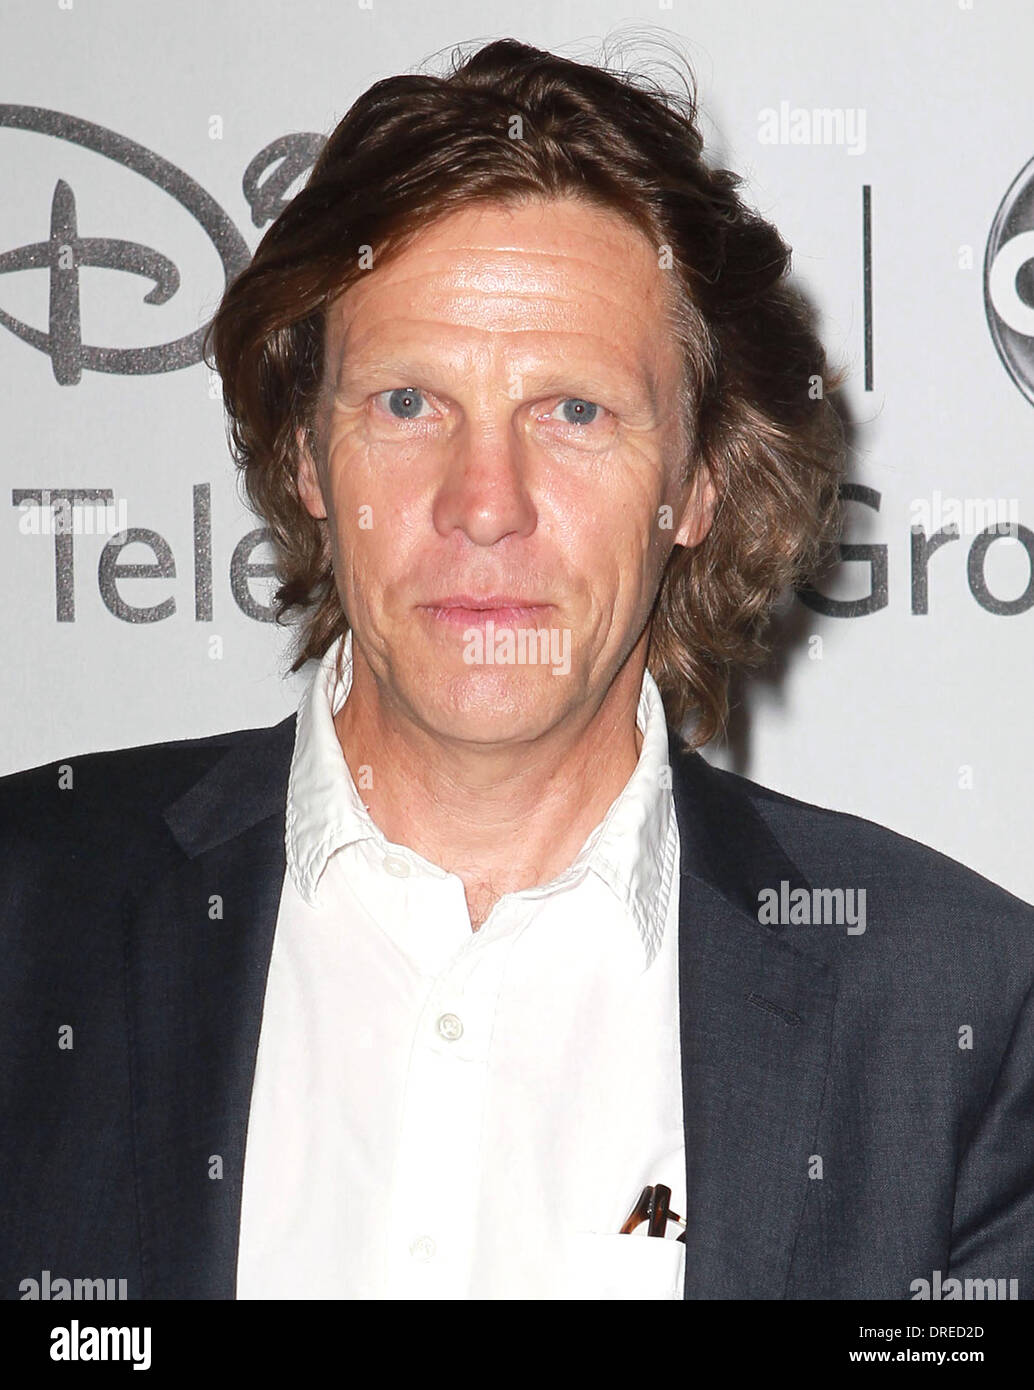 Simon Templeman 2012 TCA Summer Press Tour - Disney ABC Television Group Party held at The Beverly Hilton Hotel Beverly Hills, California - 27.07.12 Stock Photo